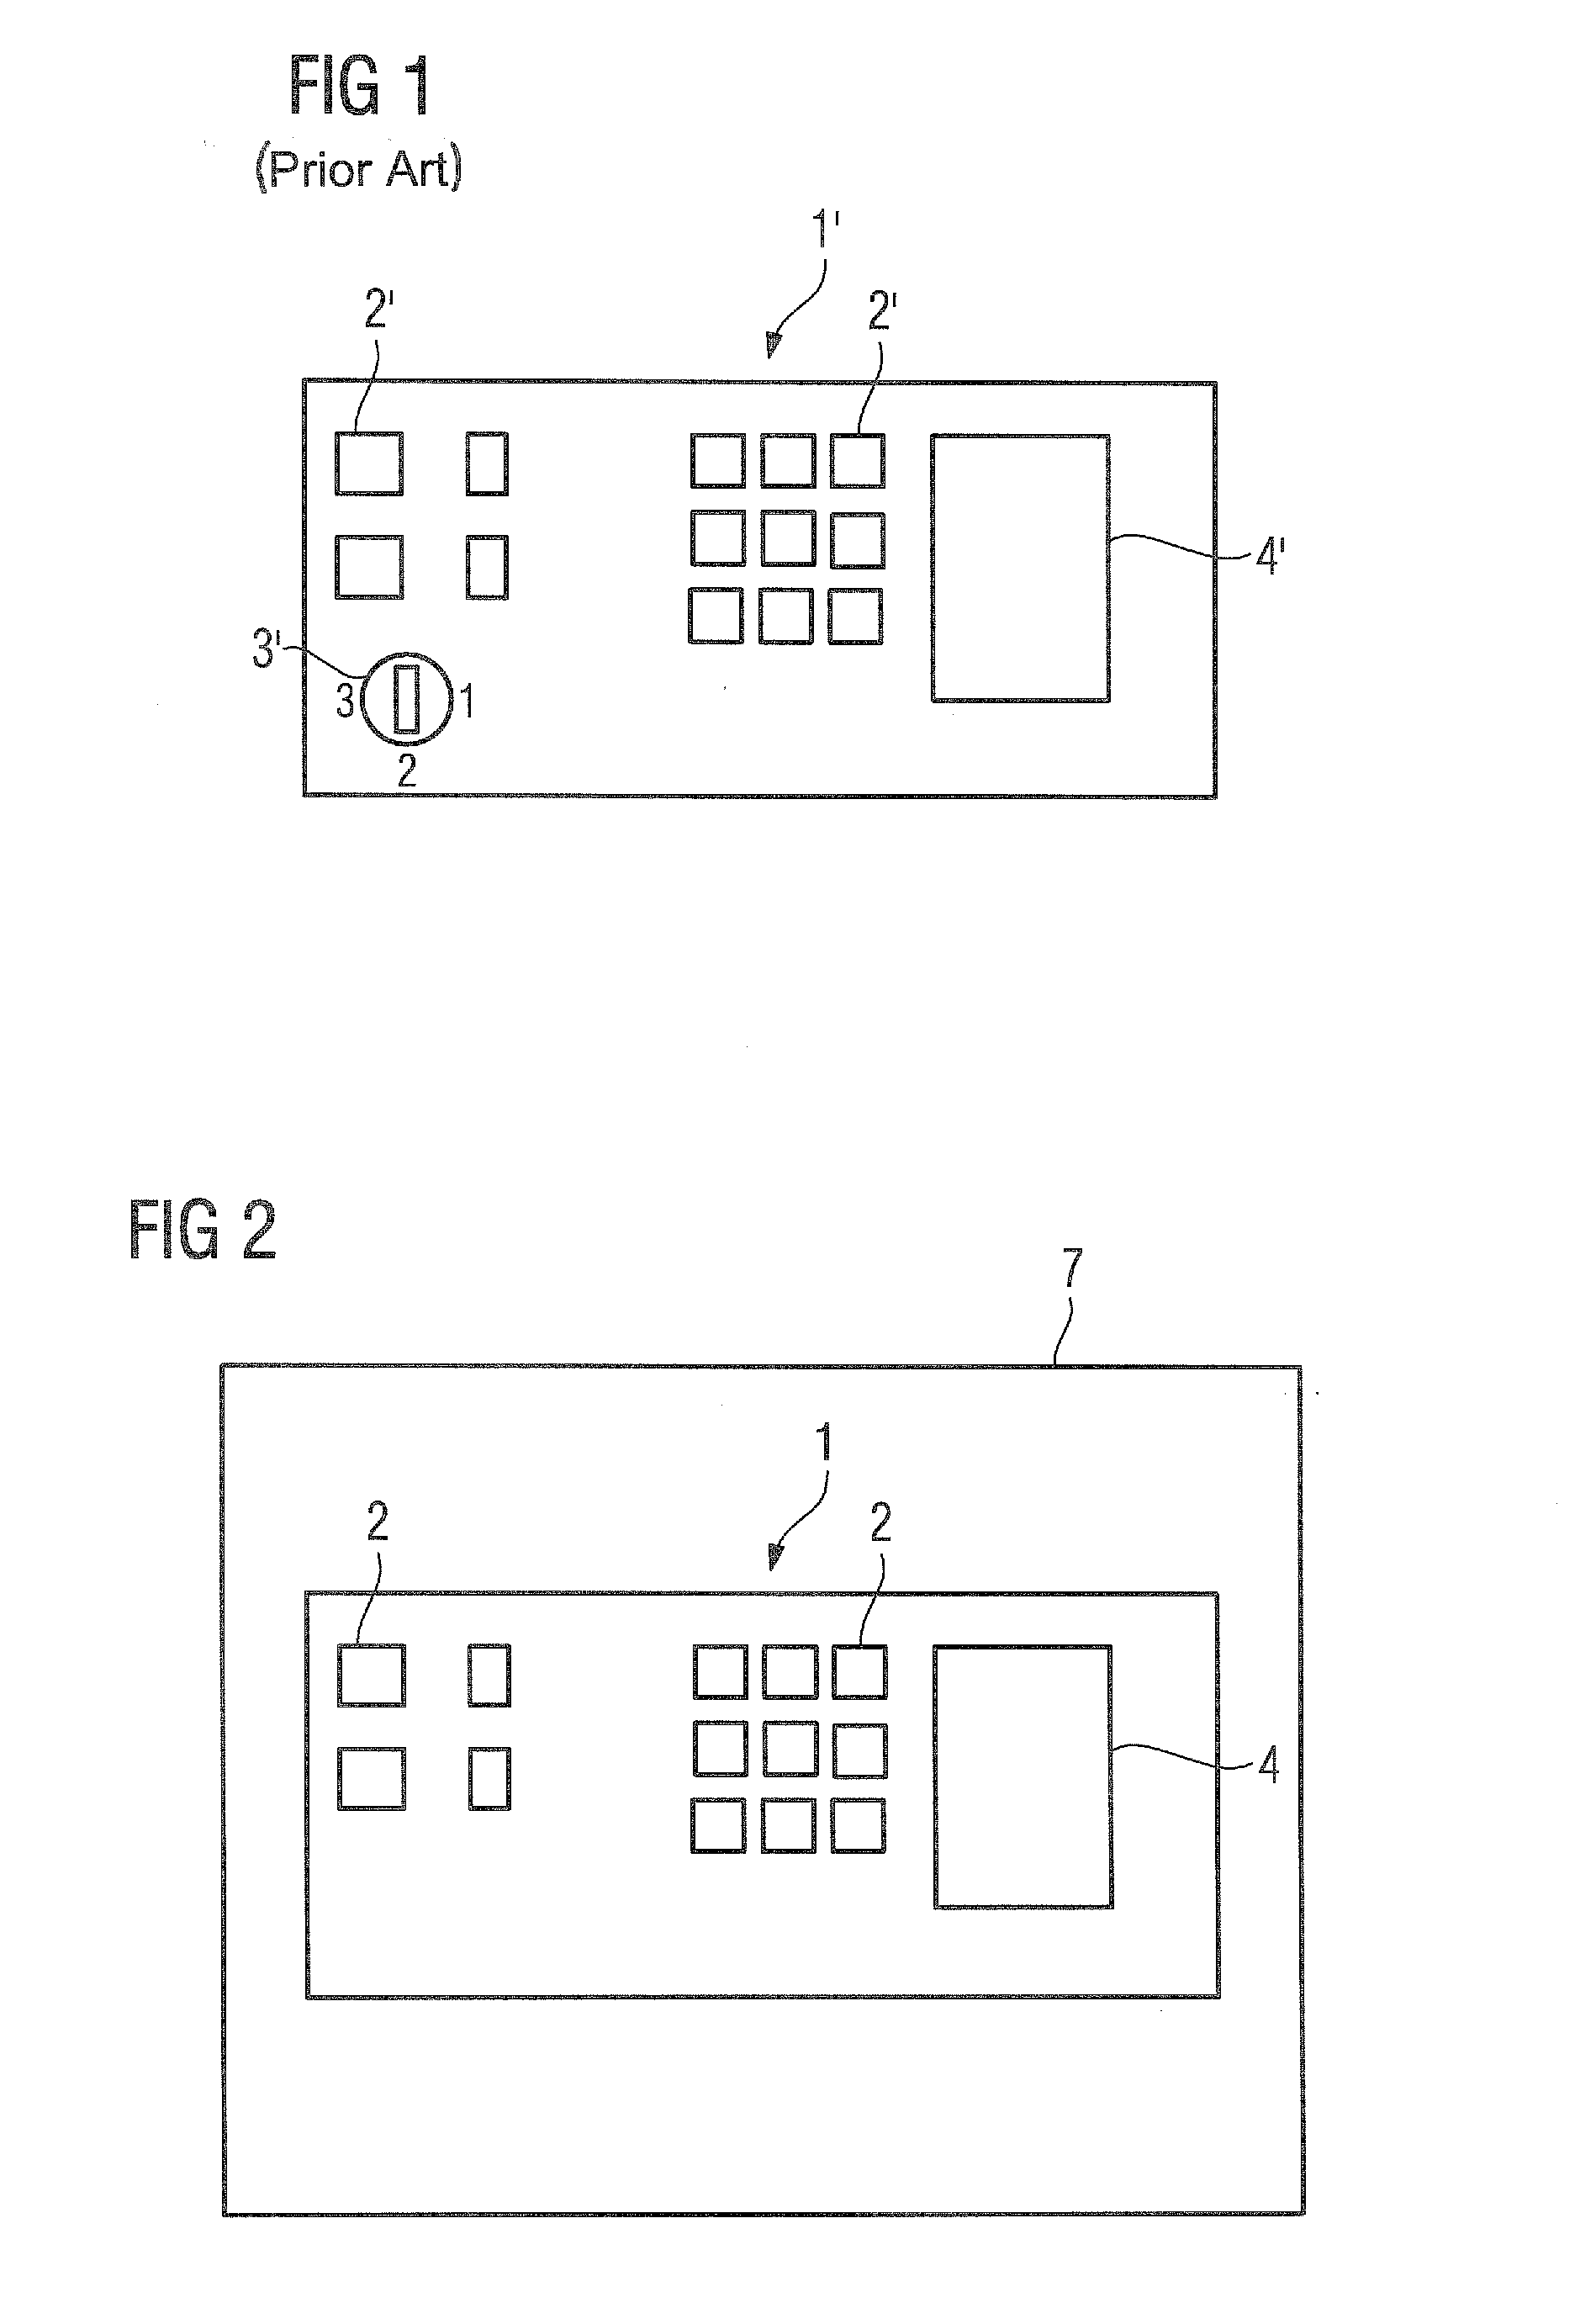 Operating device for operating a machine in the field of automation engineering